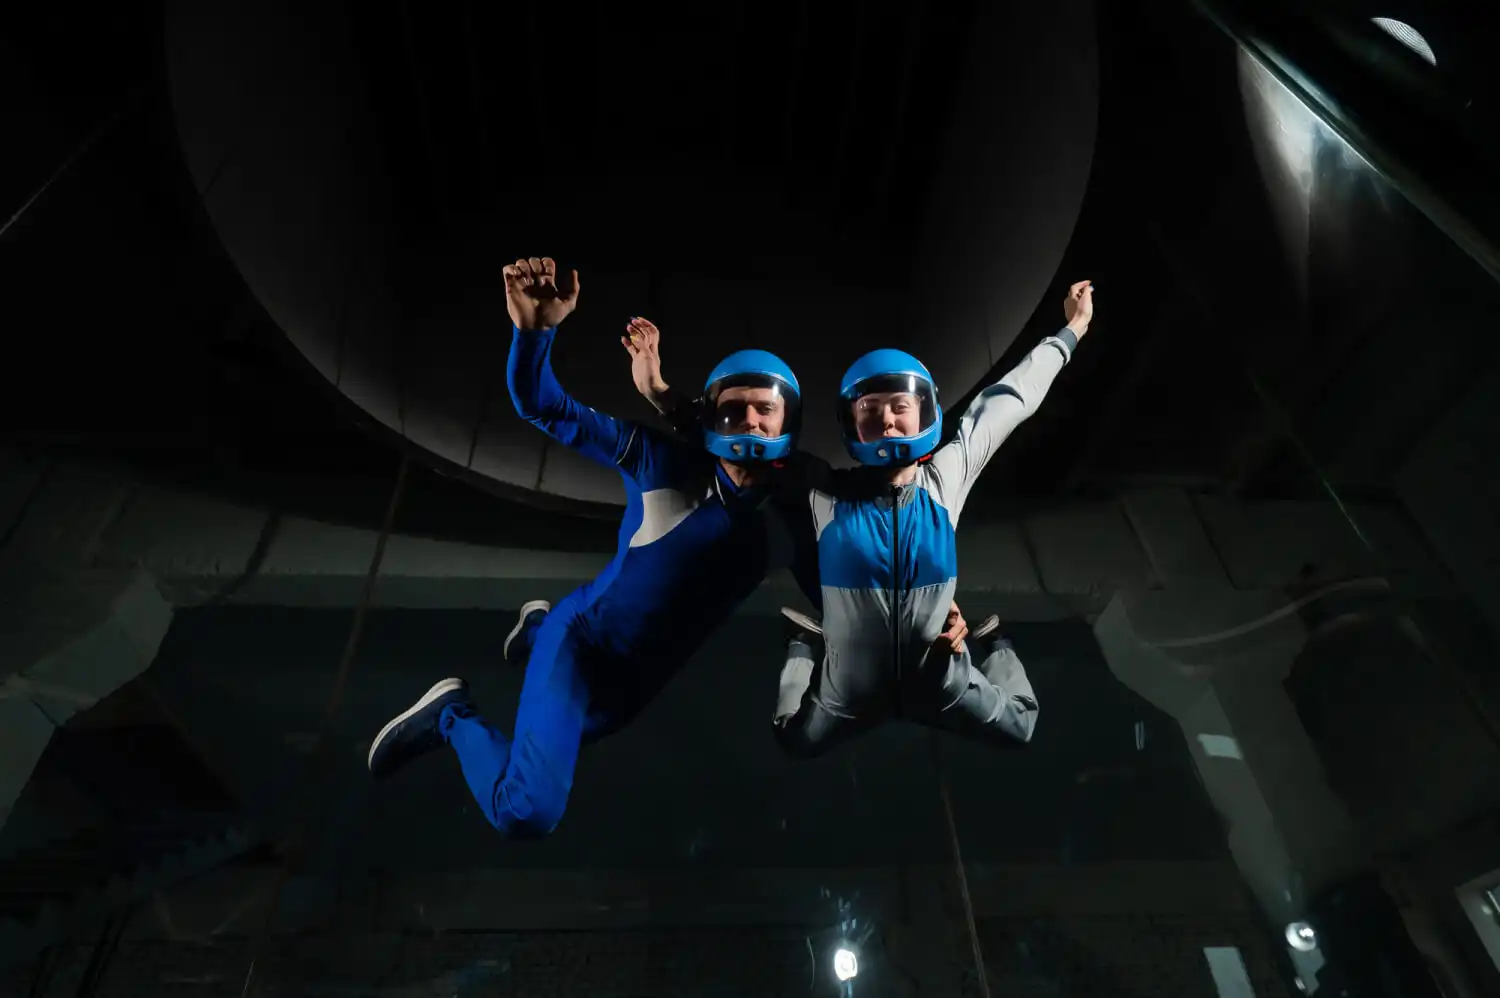 An Indoor Skydiving Experience